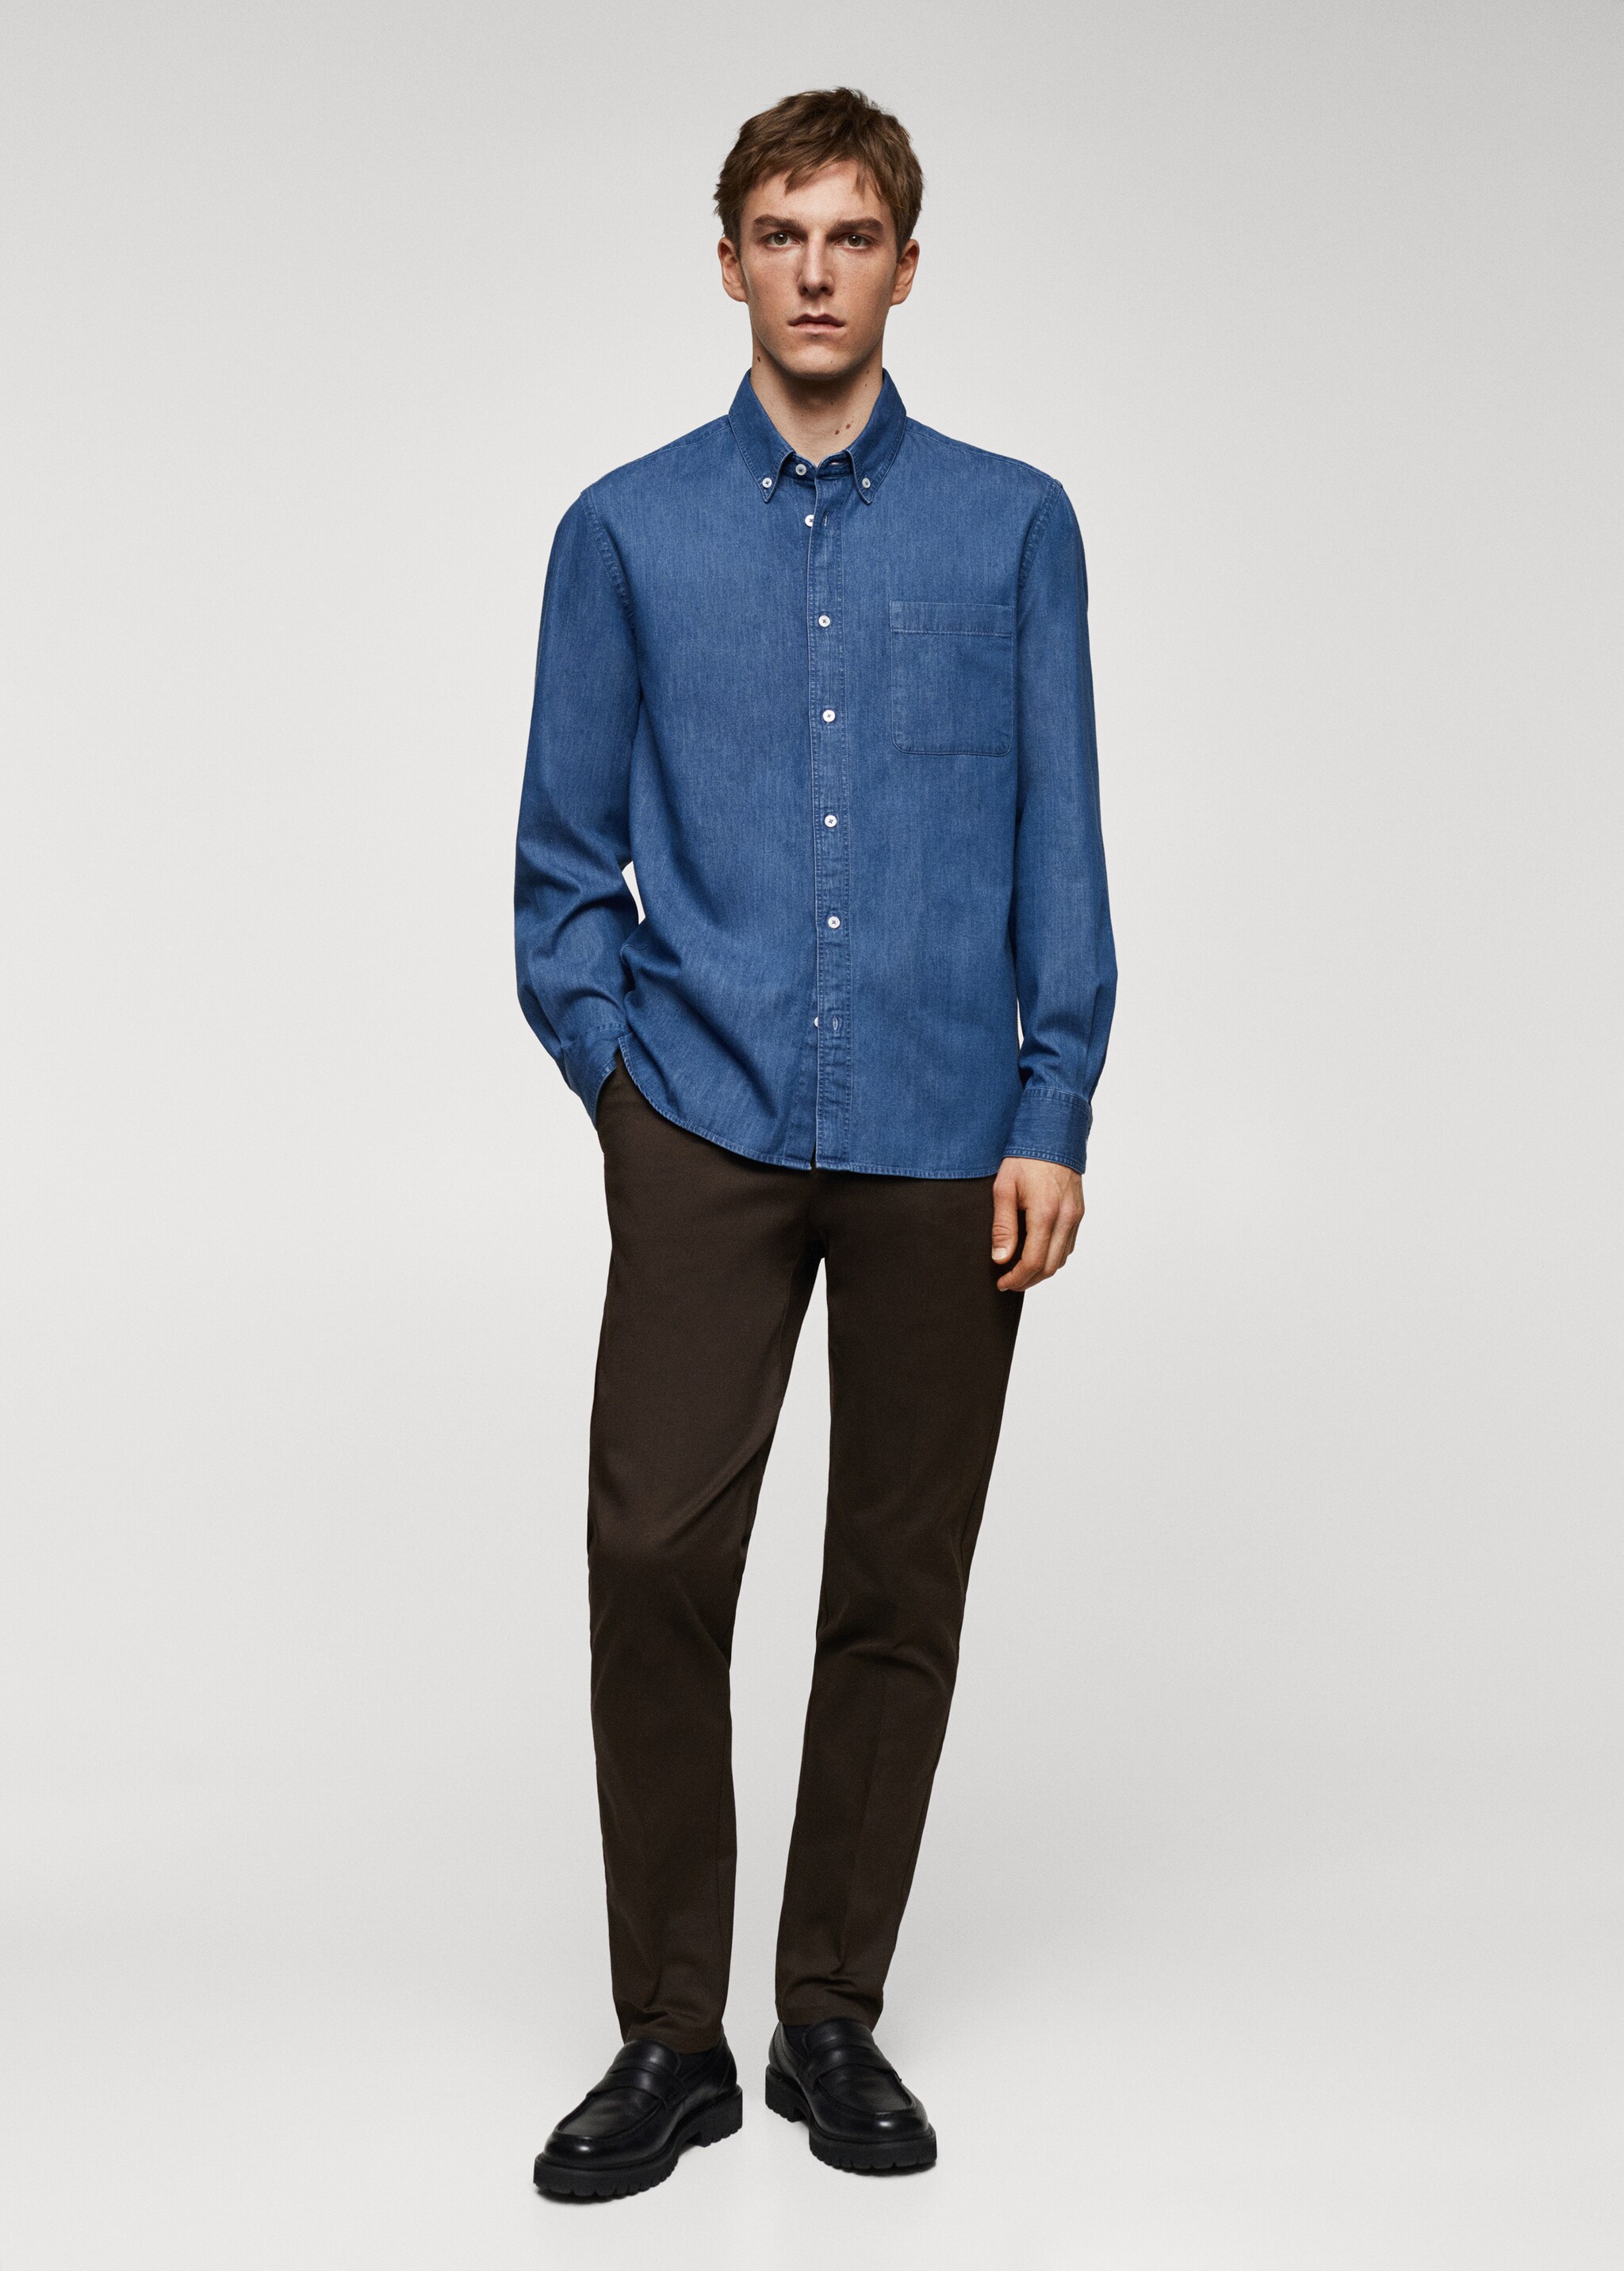 Classic-fit chambray cotton shirt - General plane